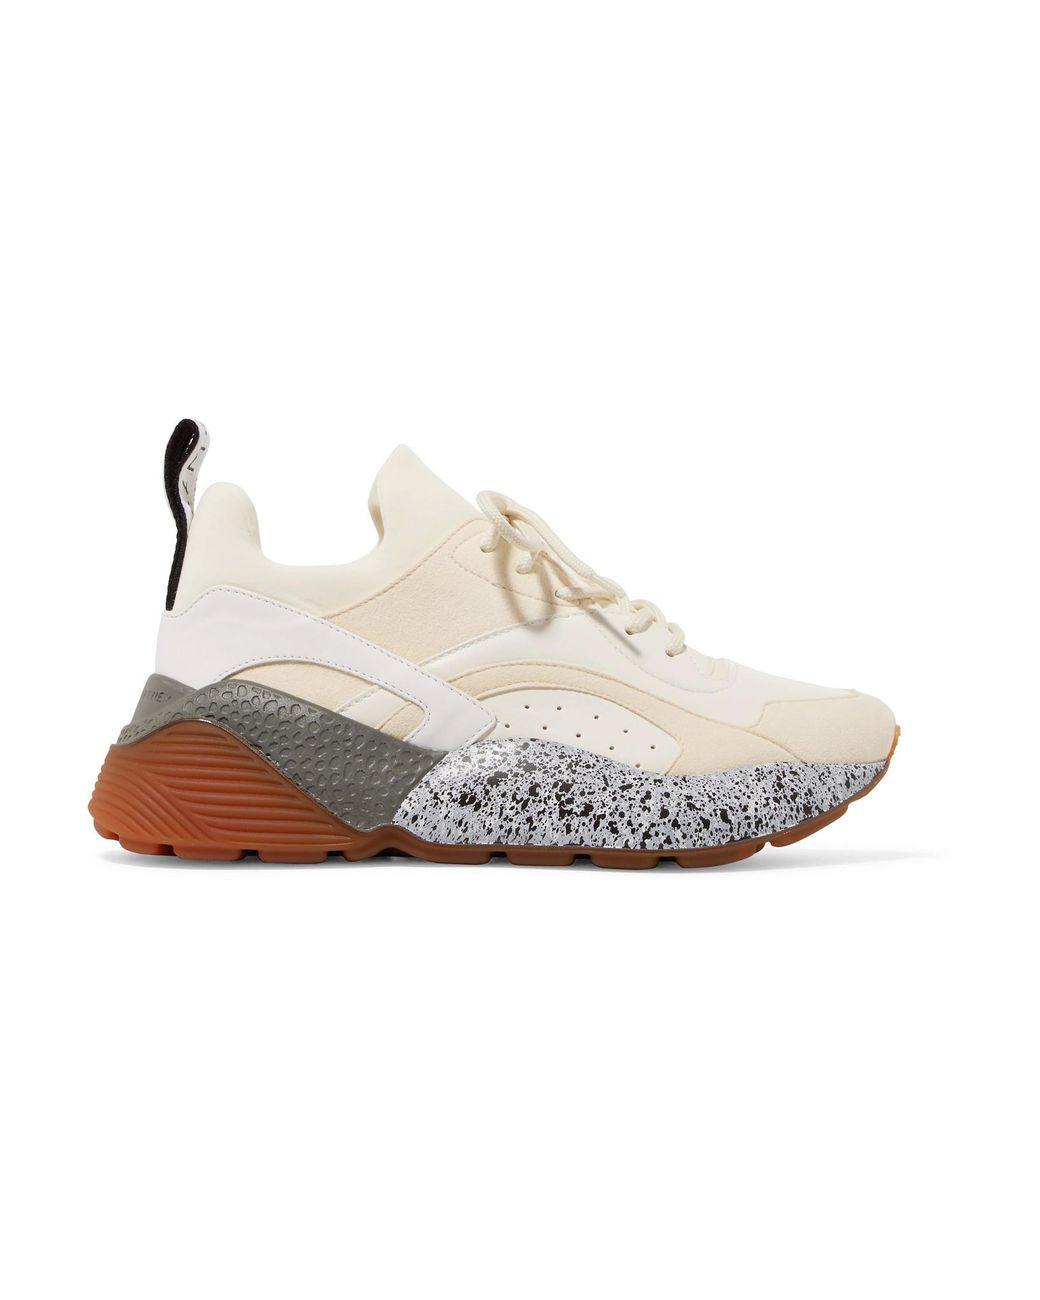 Stella McCartney Eclypse Faux Leather And Suede Sneakers in White | Lyst